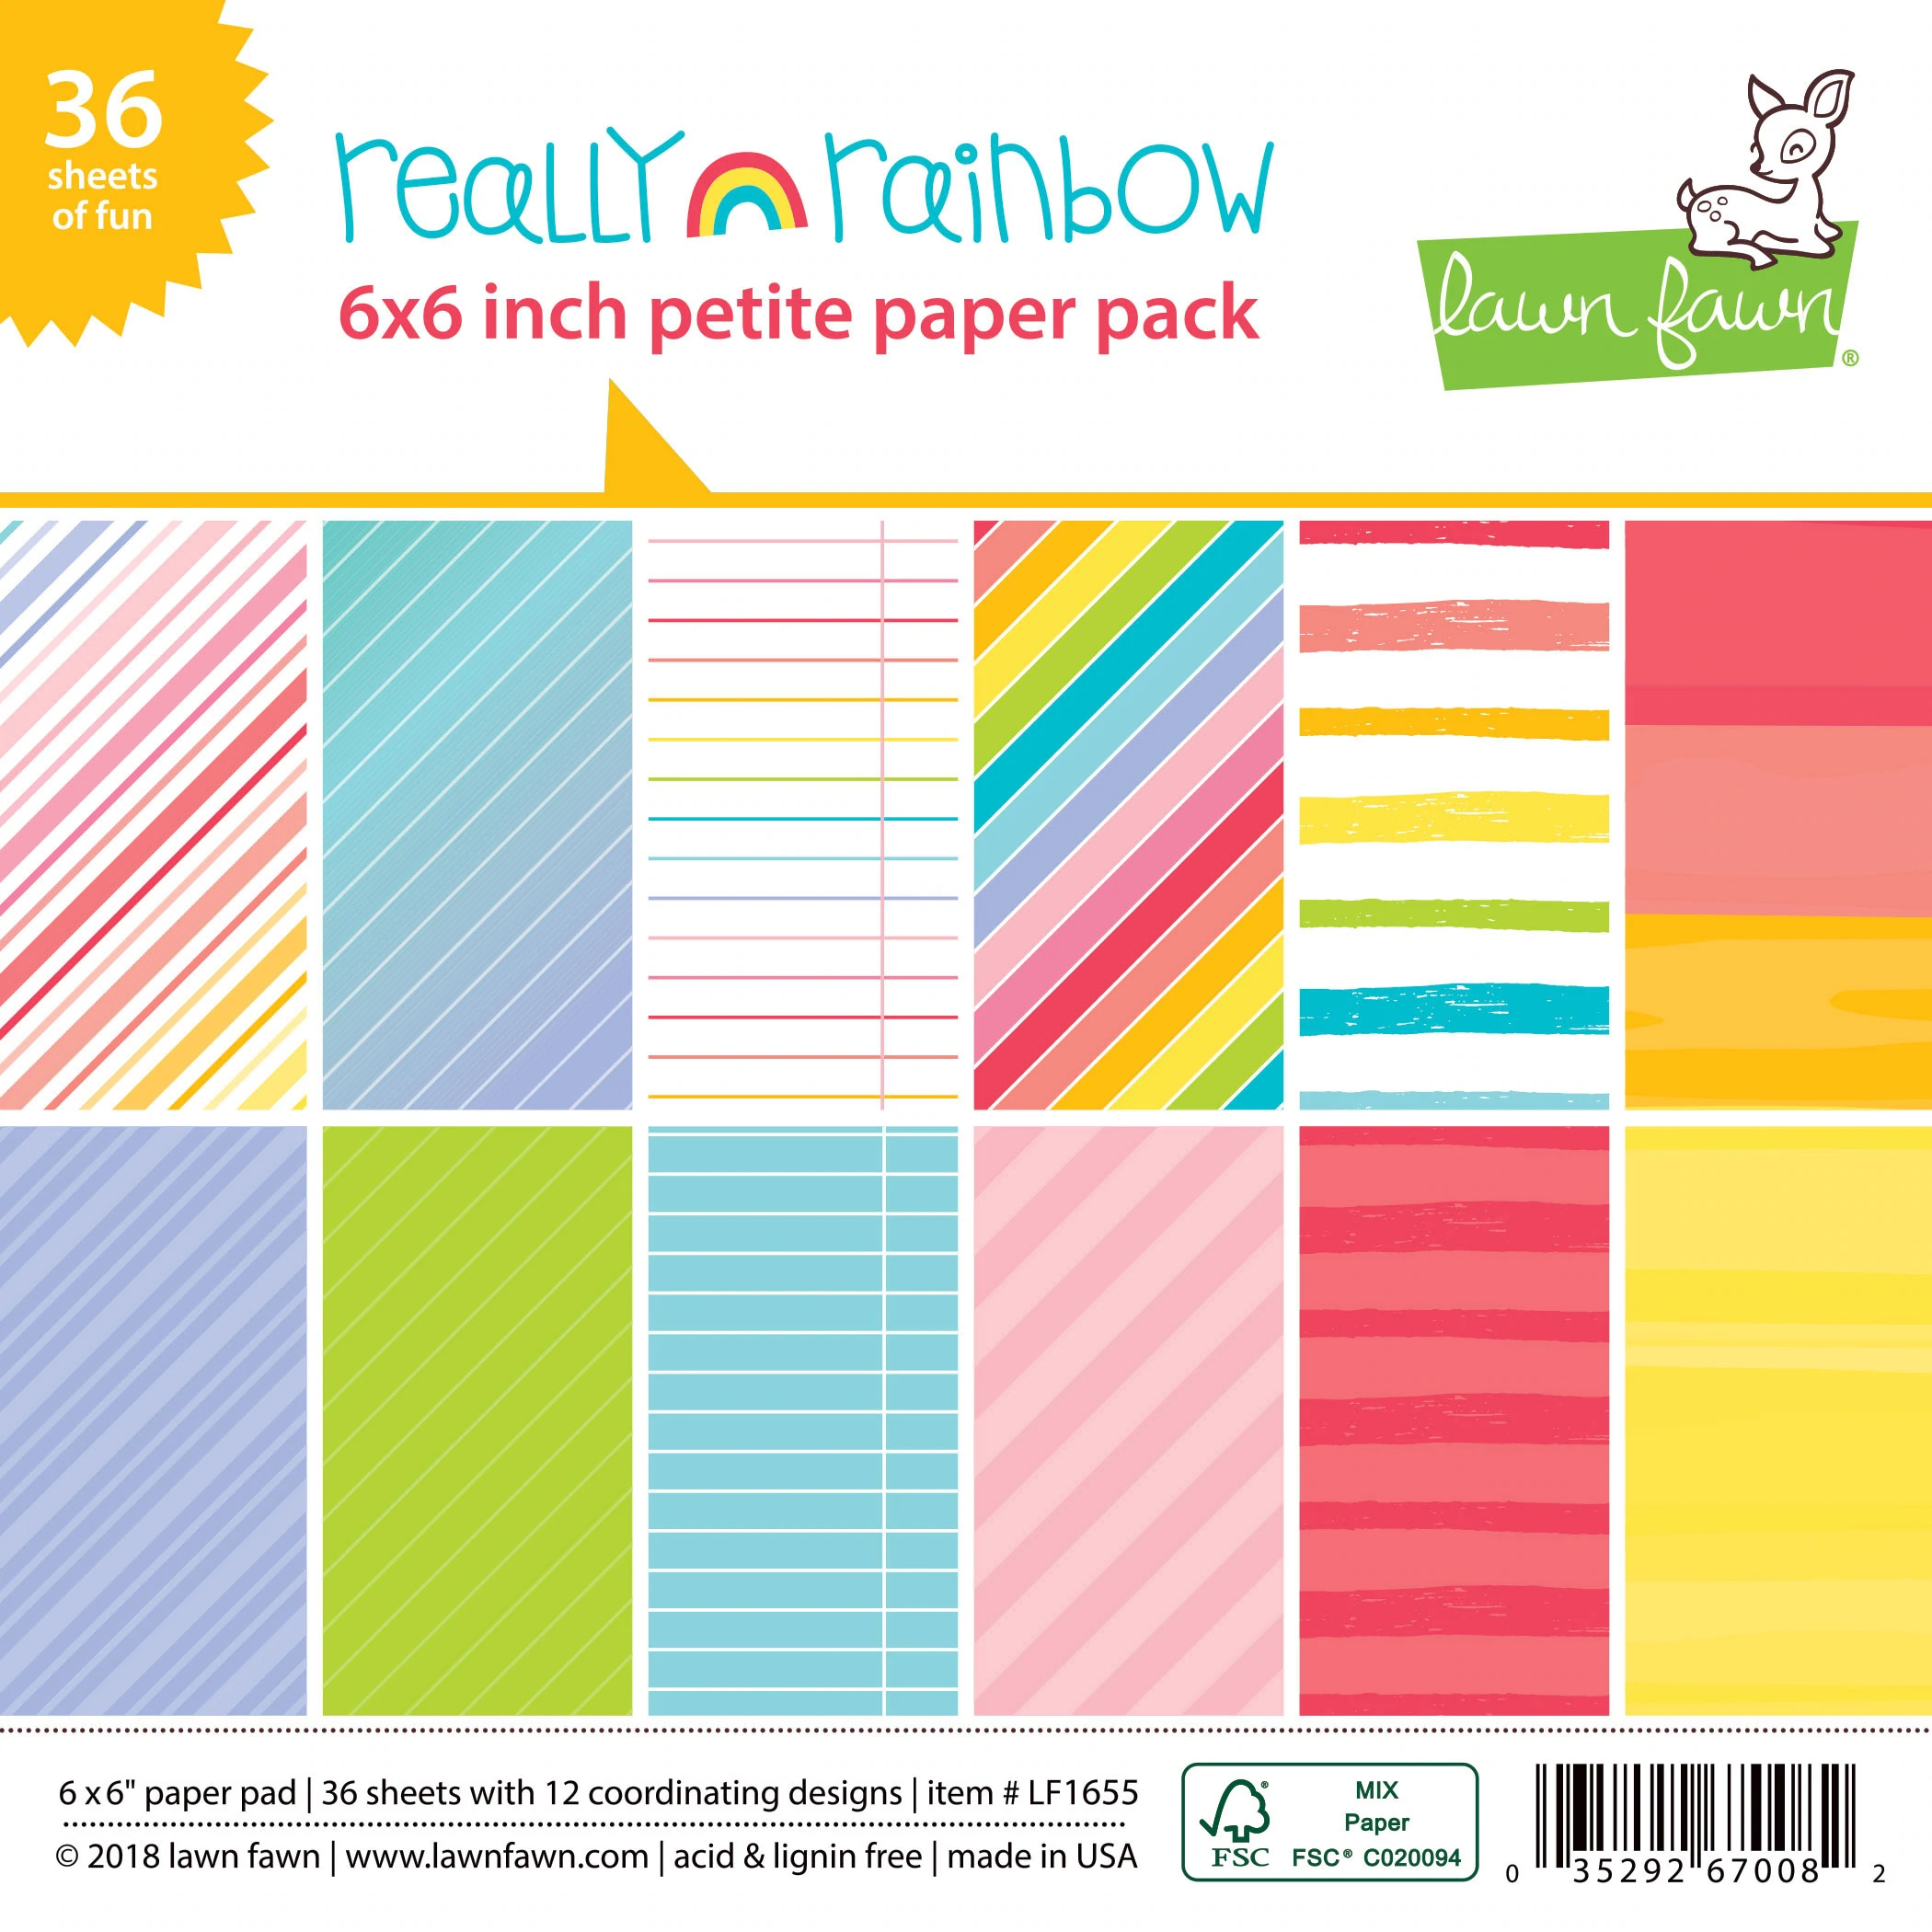 Really Rainbow Petite Paper Pack